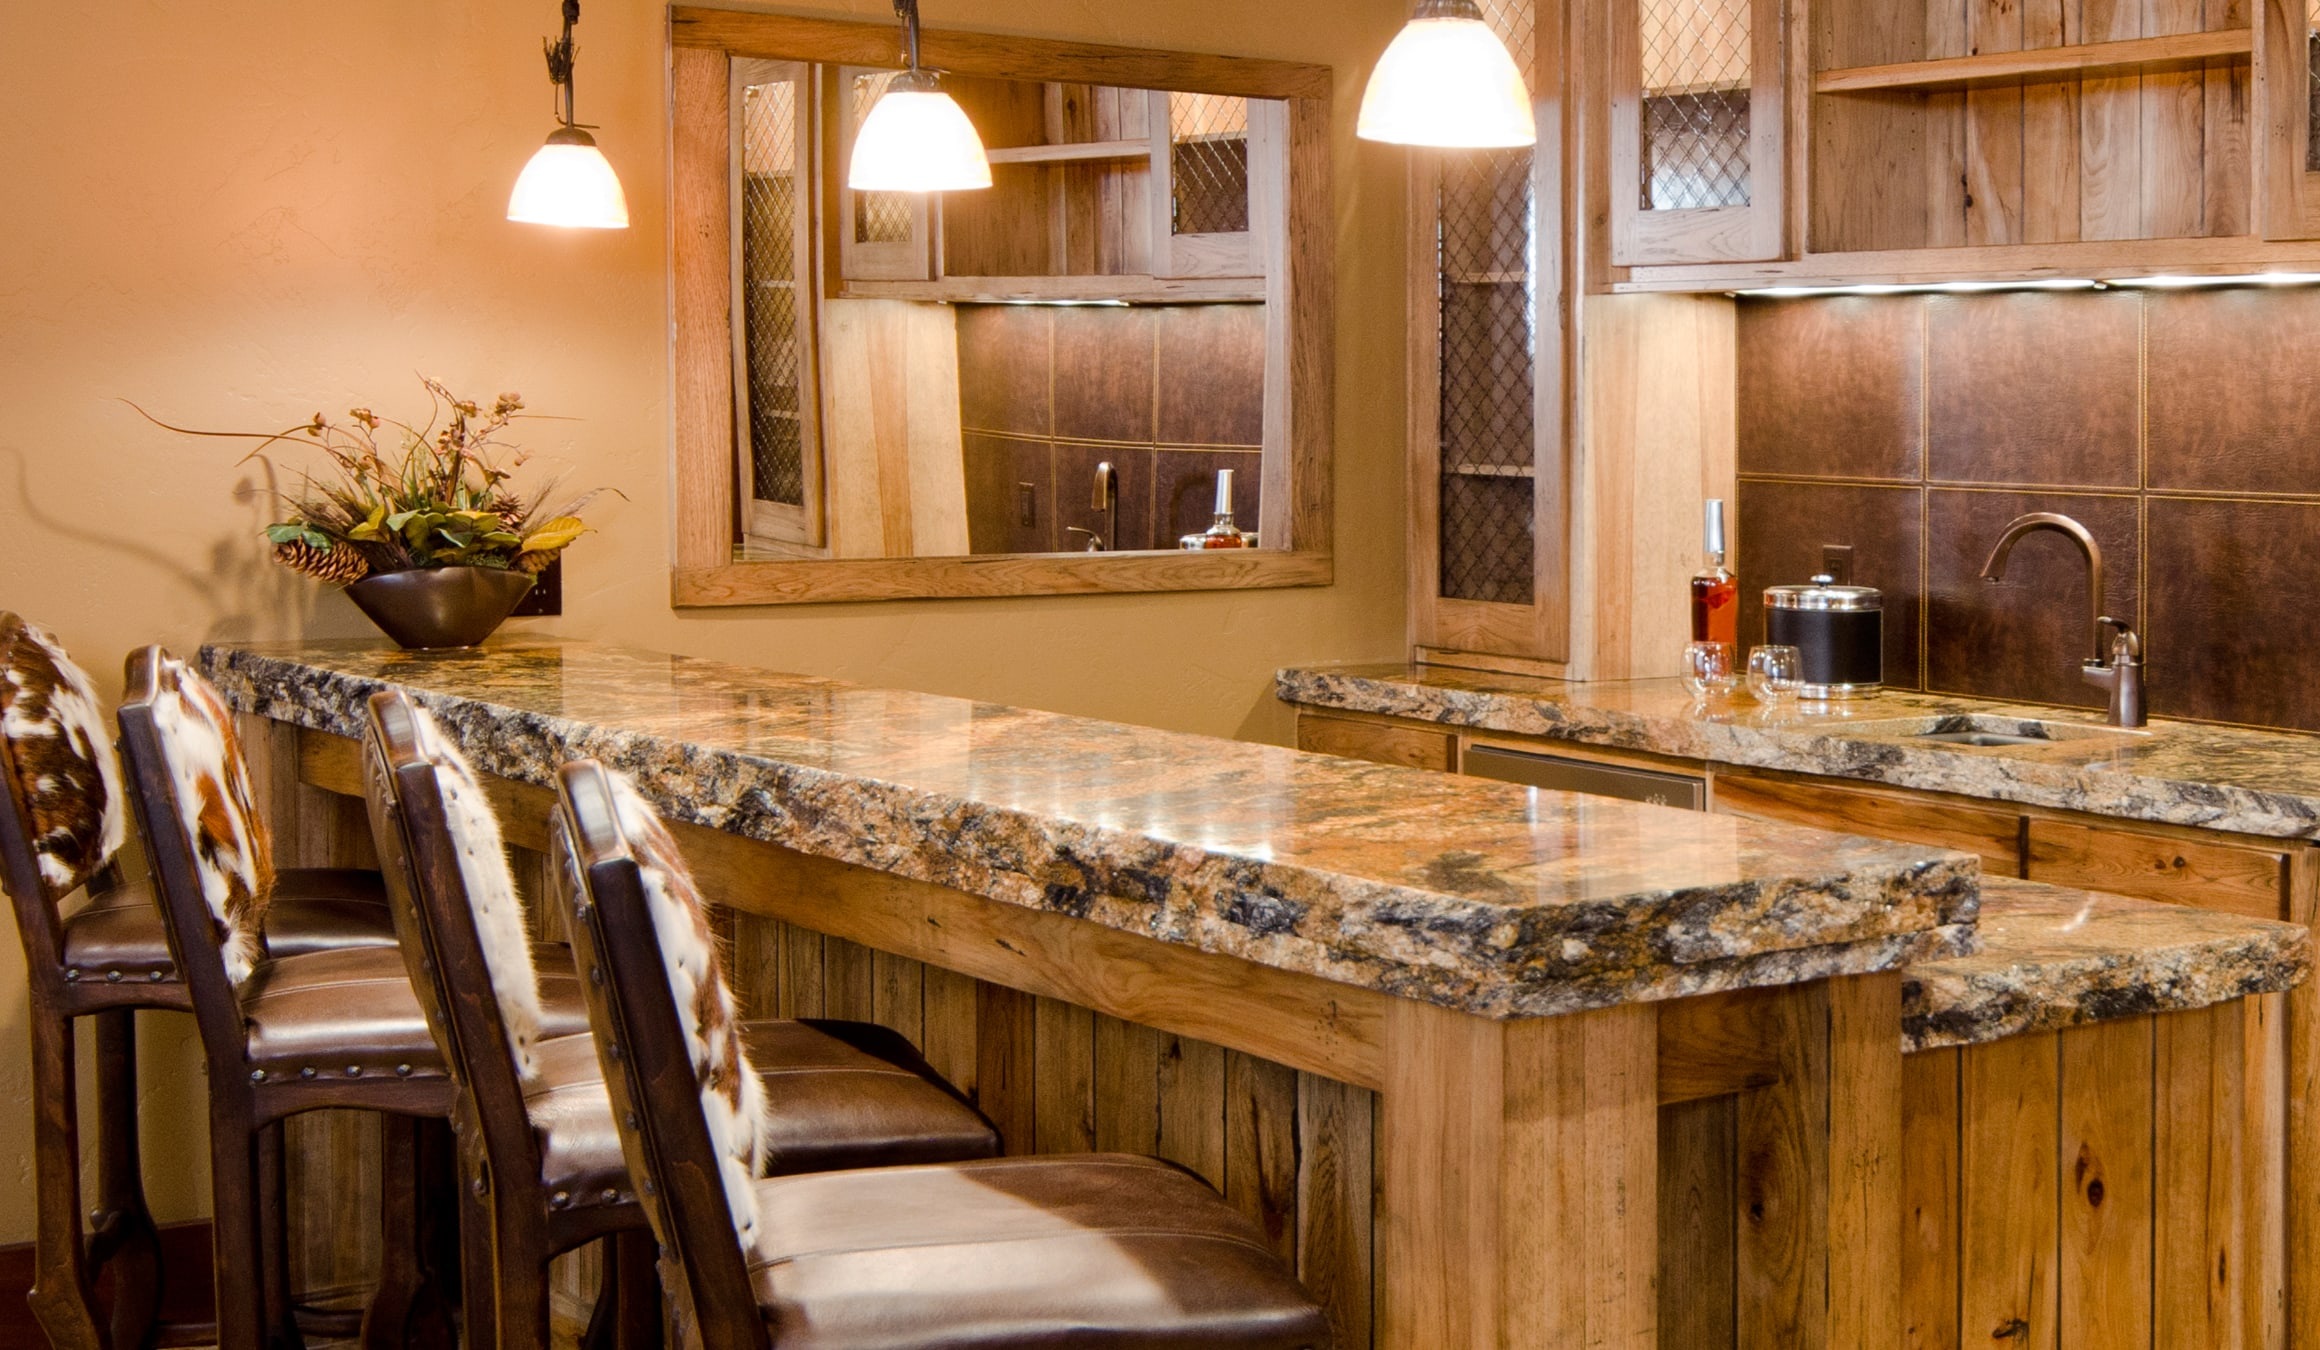 What Is The Best Natural Stone Sealer For Granite - Granite Countertop Sealer: Which is the Best?